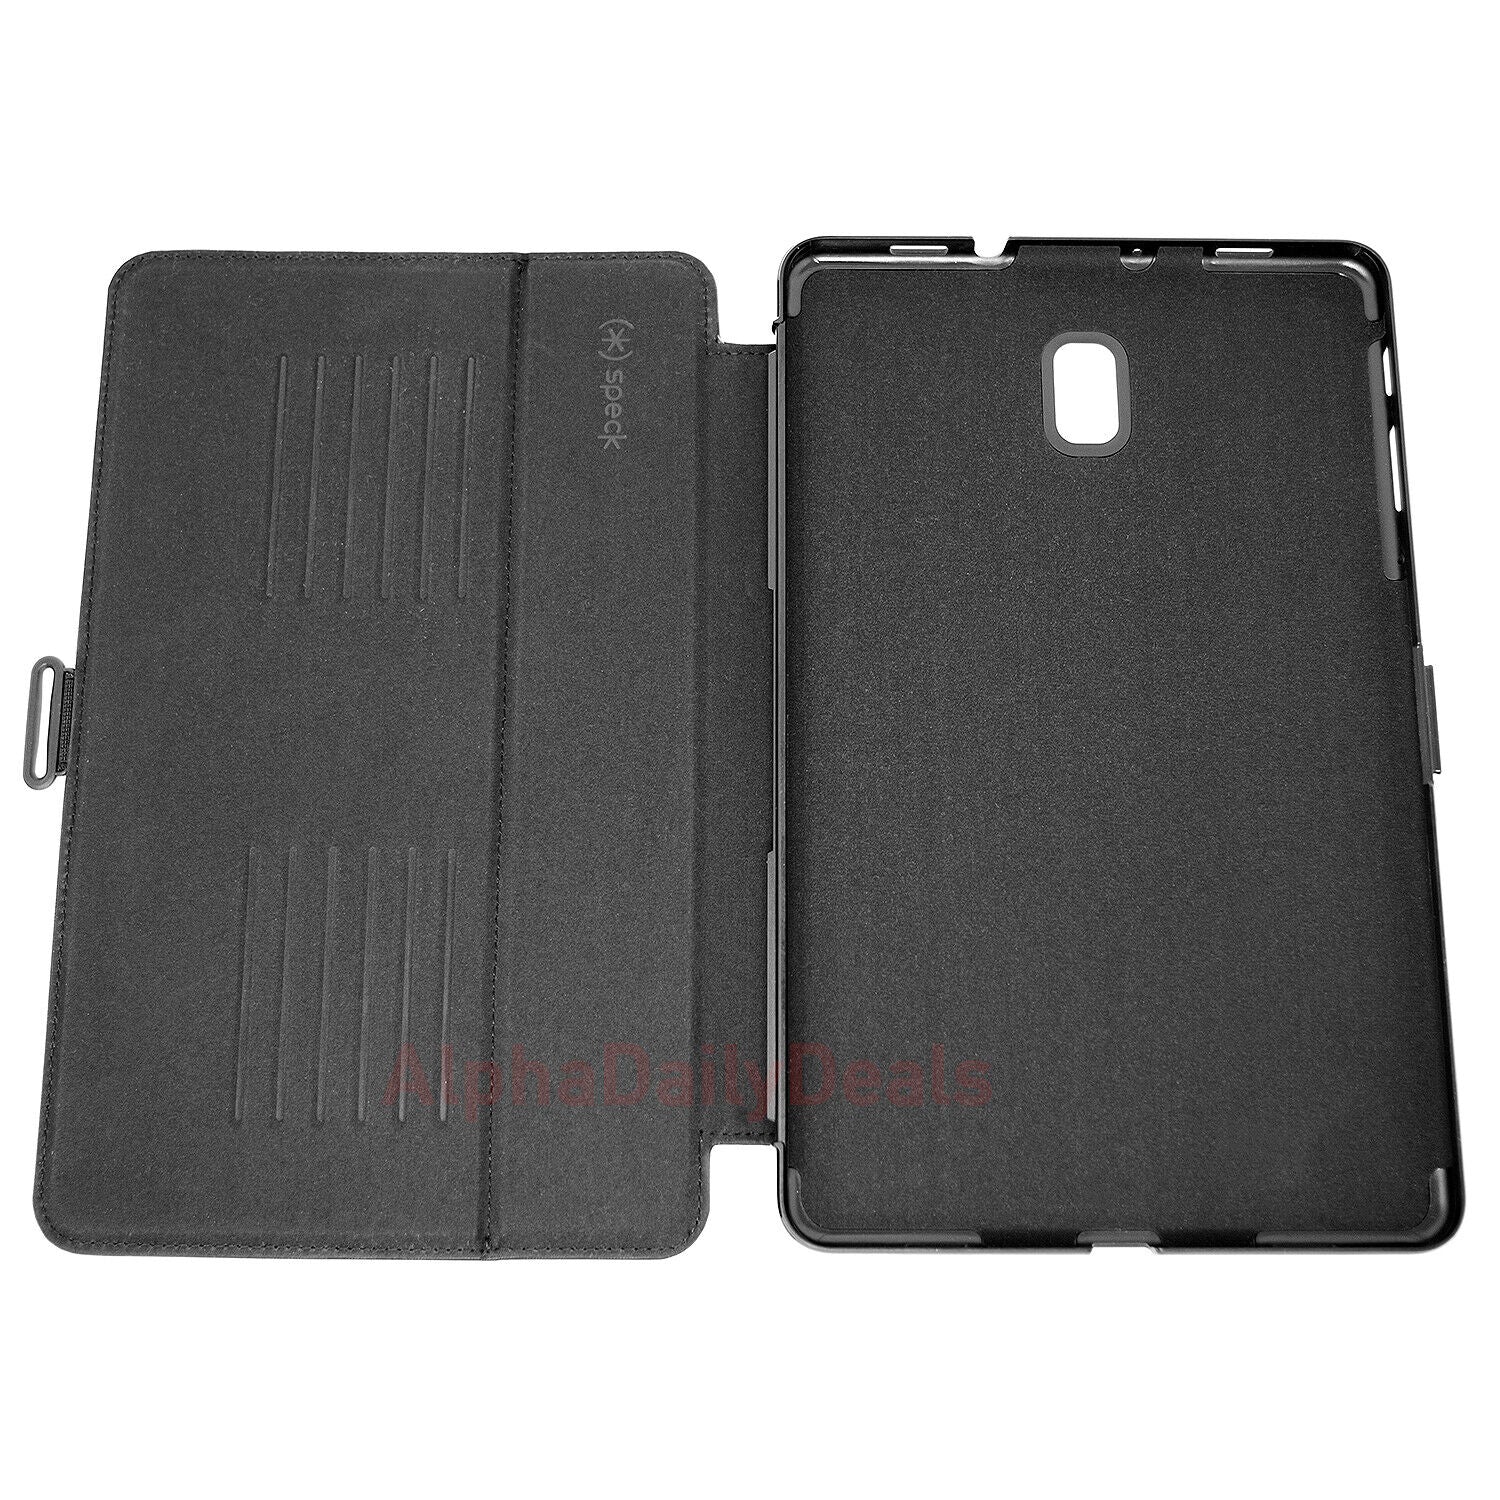 Speck Samsung Galaxy Tab A 10.5 Folio Case Protective Cover Stand Black